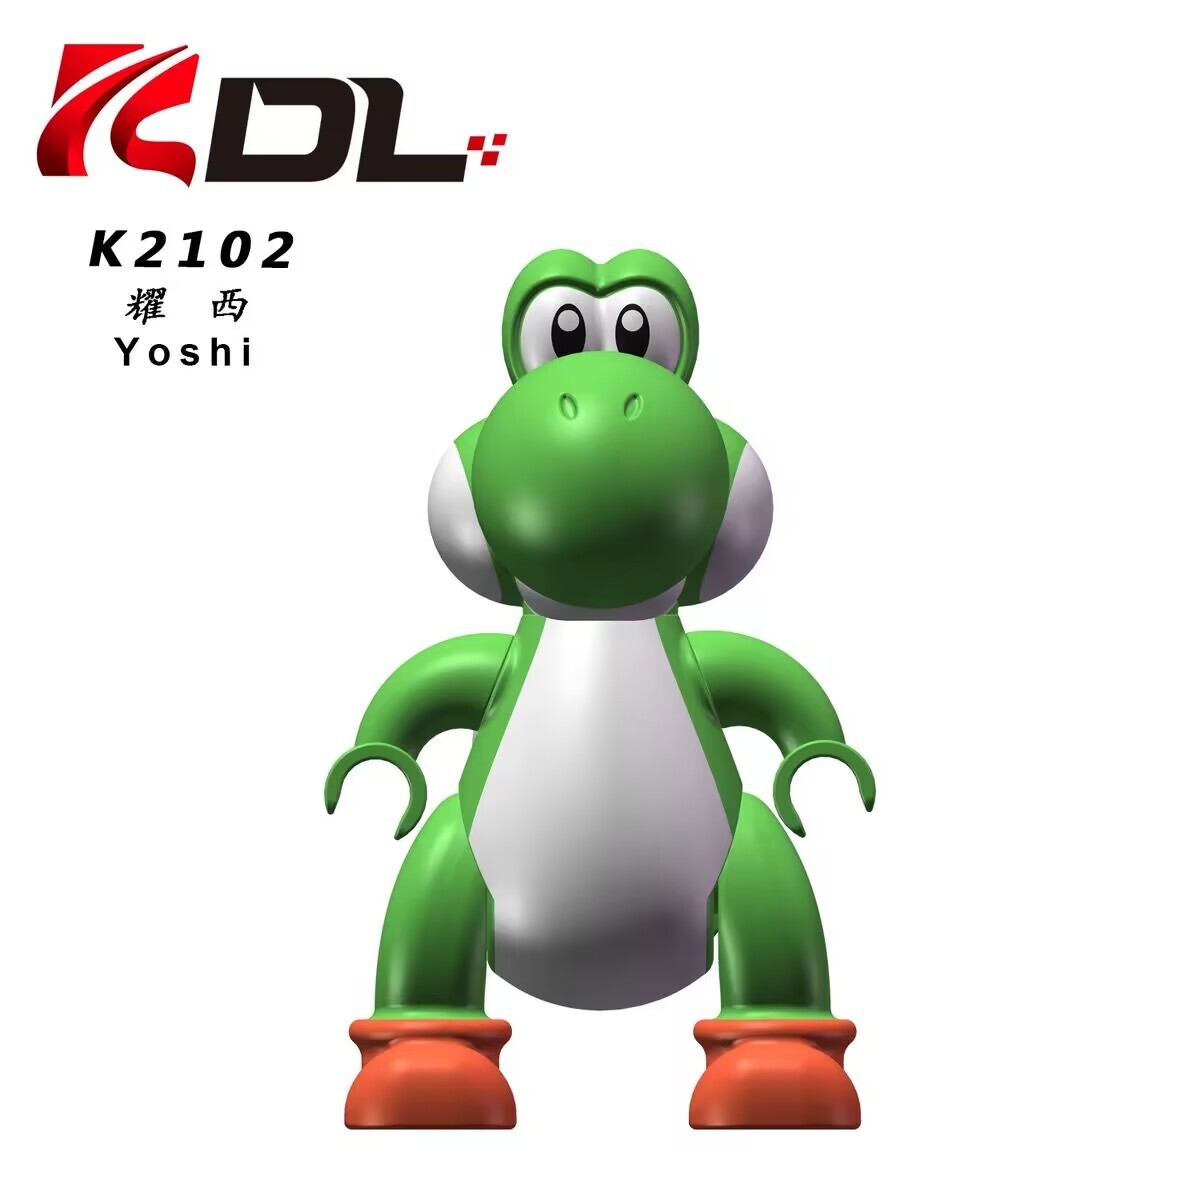 K2102 CY2006 Suuper Mario Yoshi  Game Series Characters Building Blocks Action Figures Educational Toys for Kids Gifts 